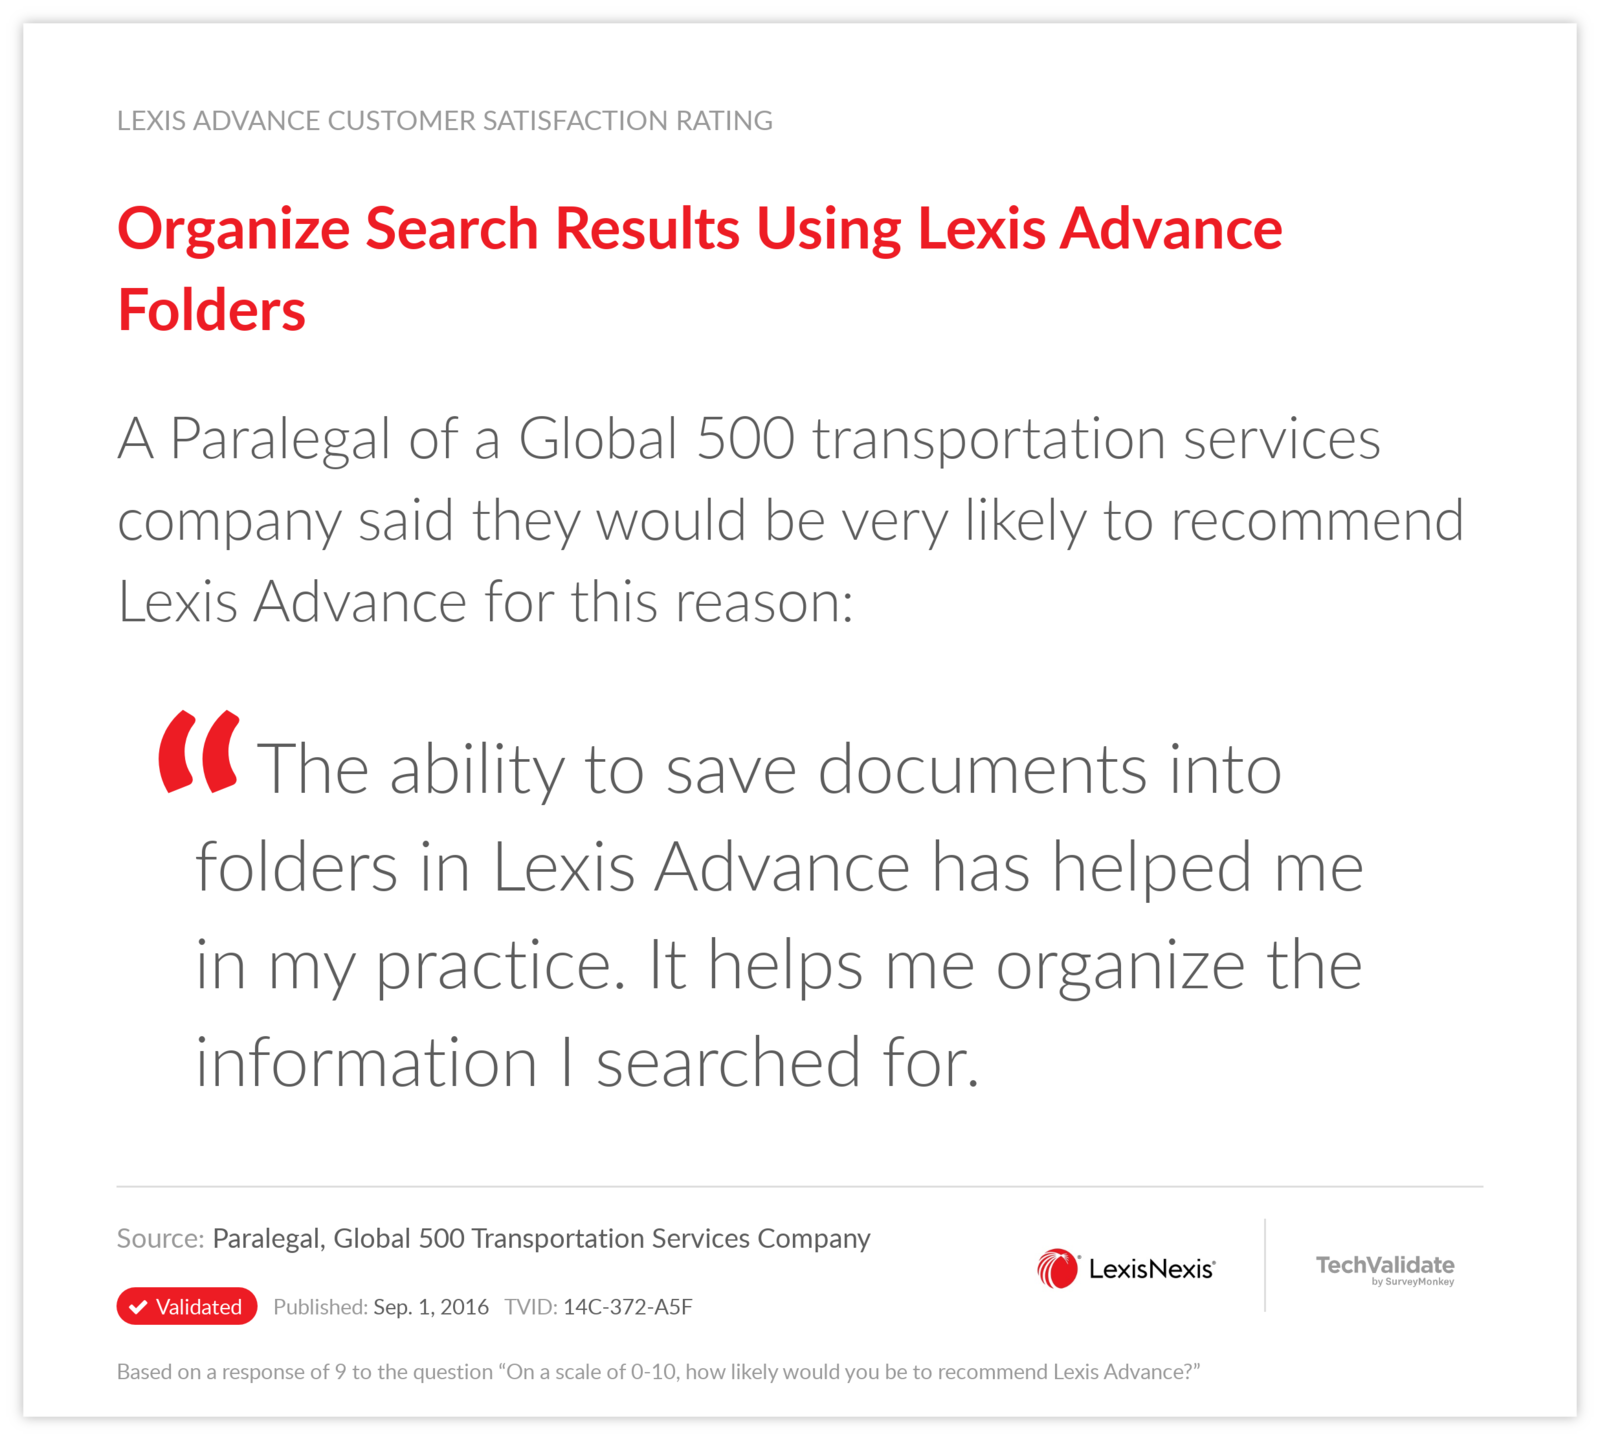 Organize Search Results Using Lexis Advance Folders